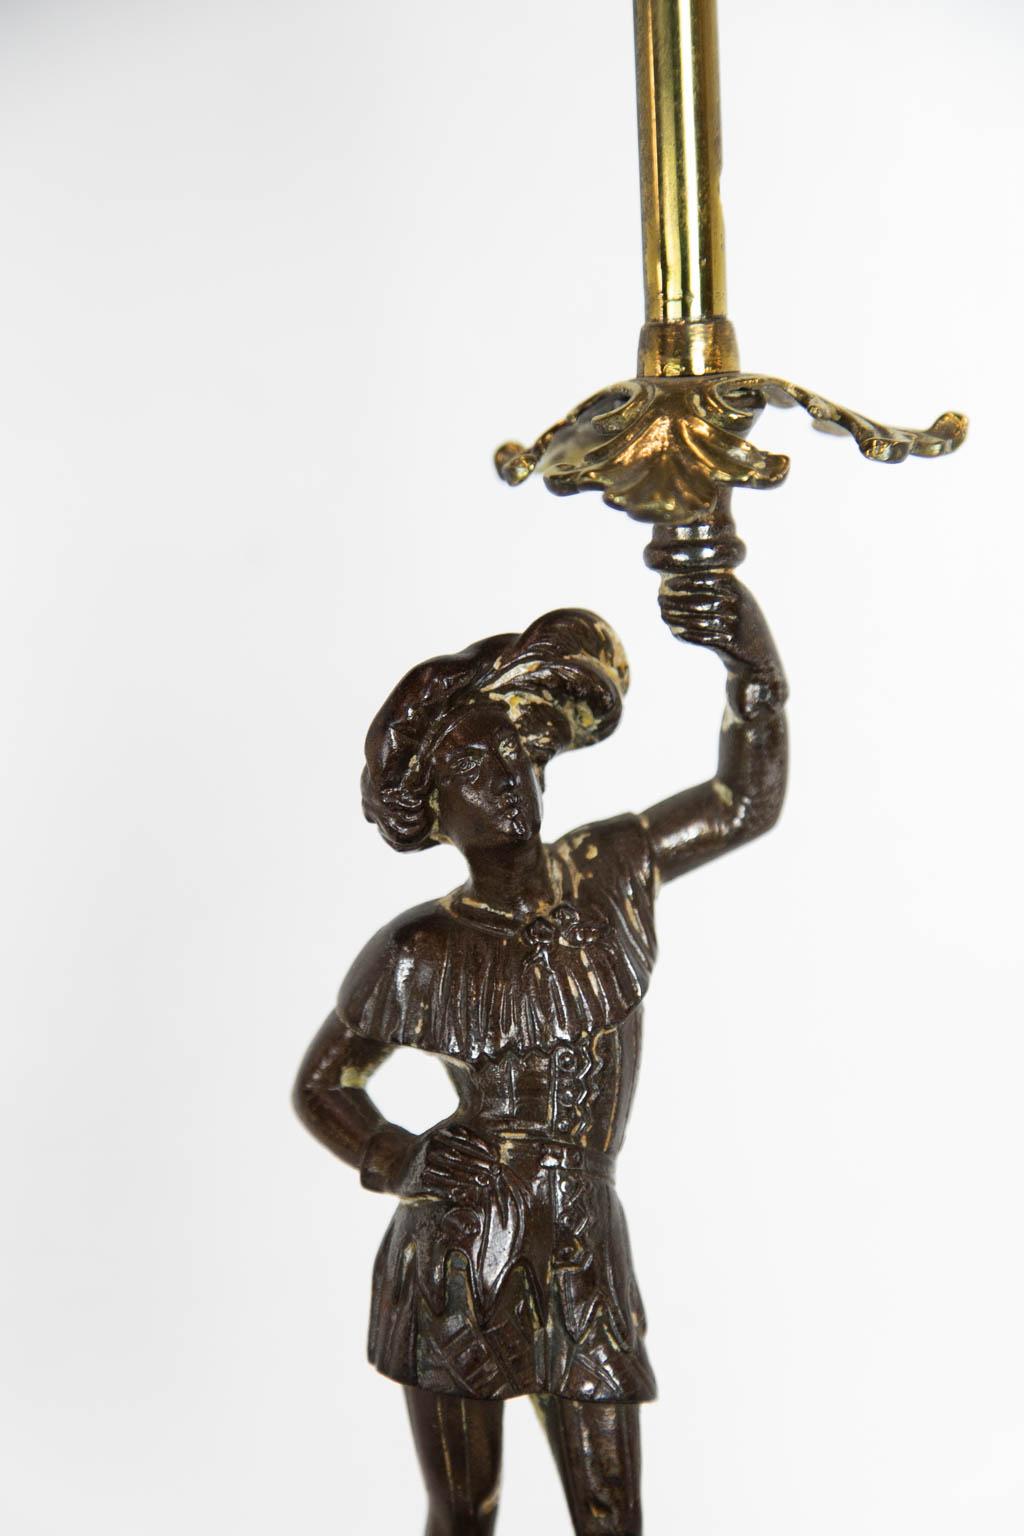 This lamp has a molded wooden base with a steel and brass figure of a cavalier.